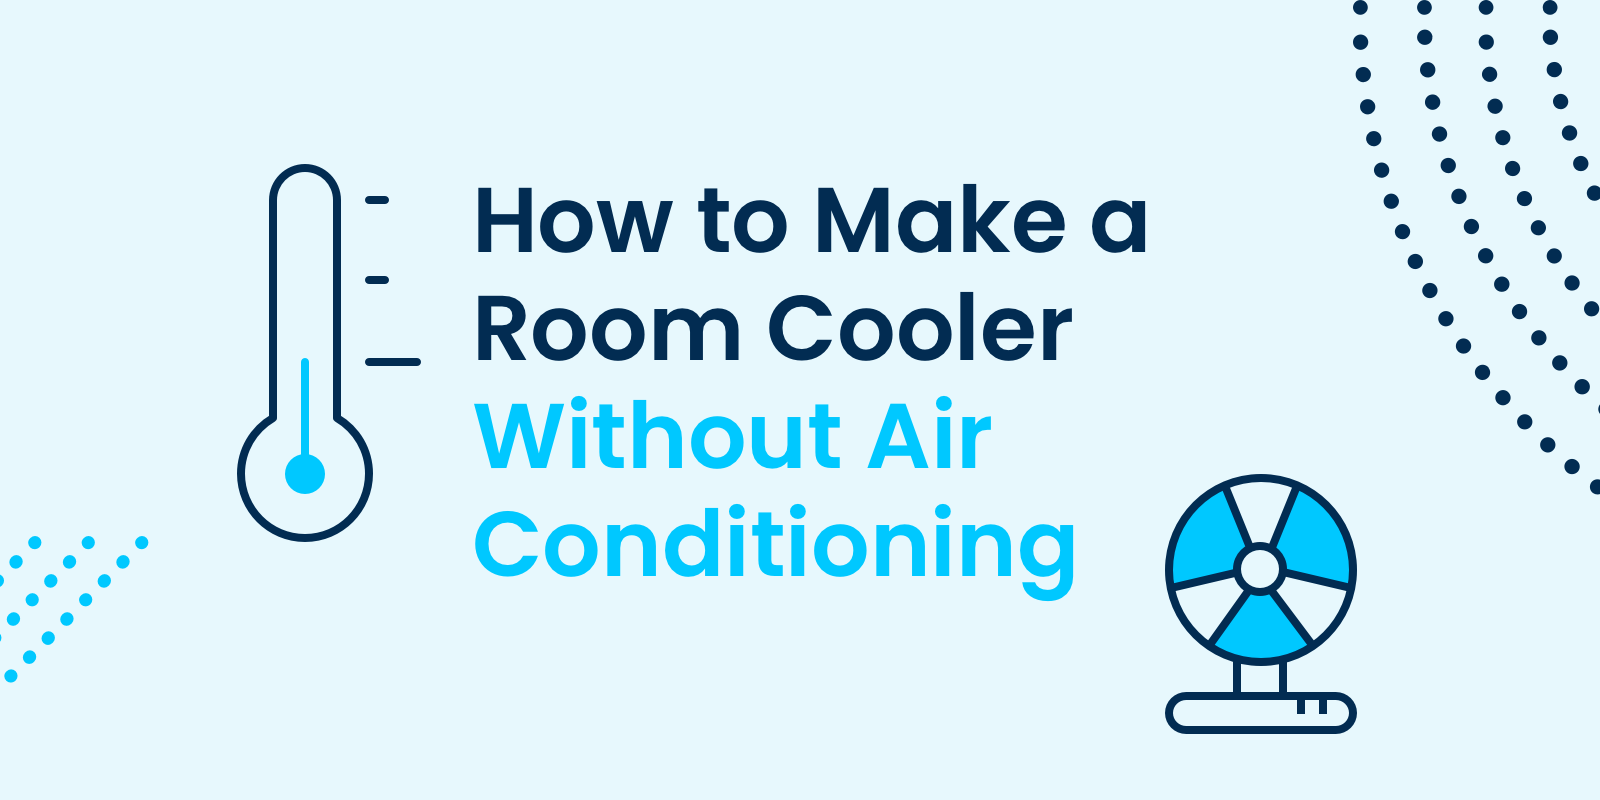 No Air Conditioning in Your Rental Property? Here’s What Landlords Can Do